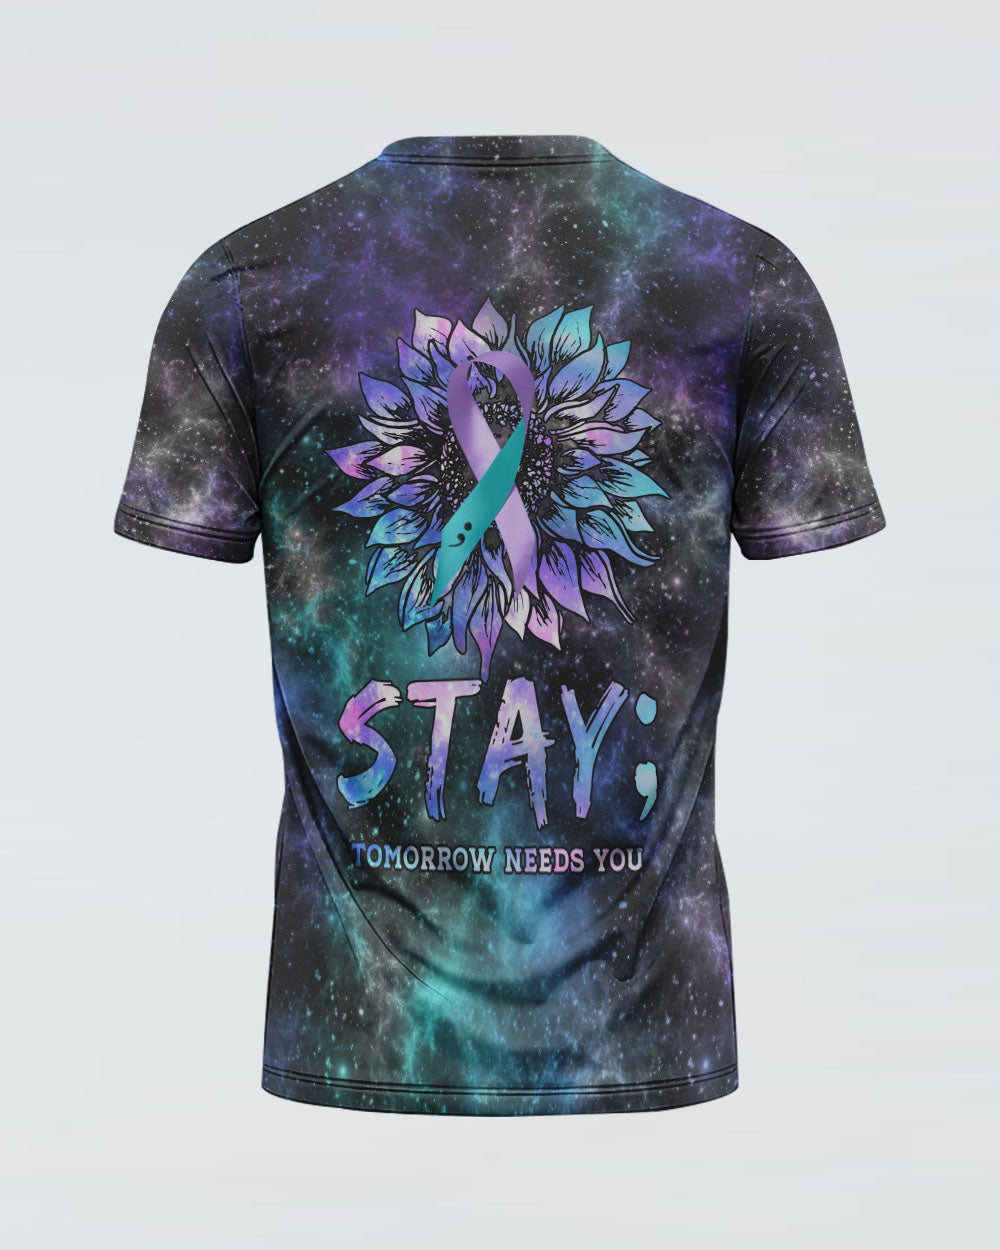 Stay Tomorrow Needs You Women's Suicide Prevention Awareness Tshirt